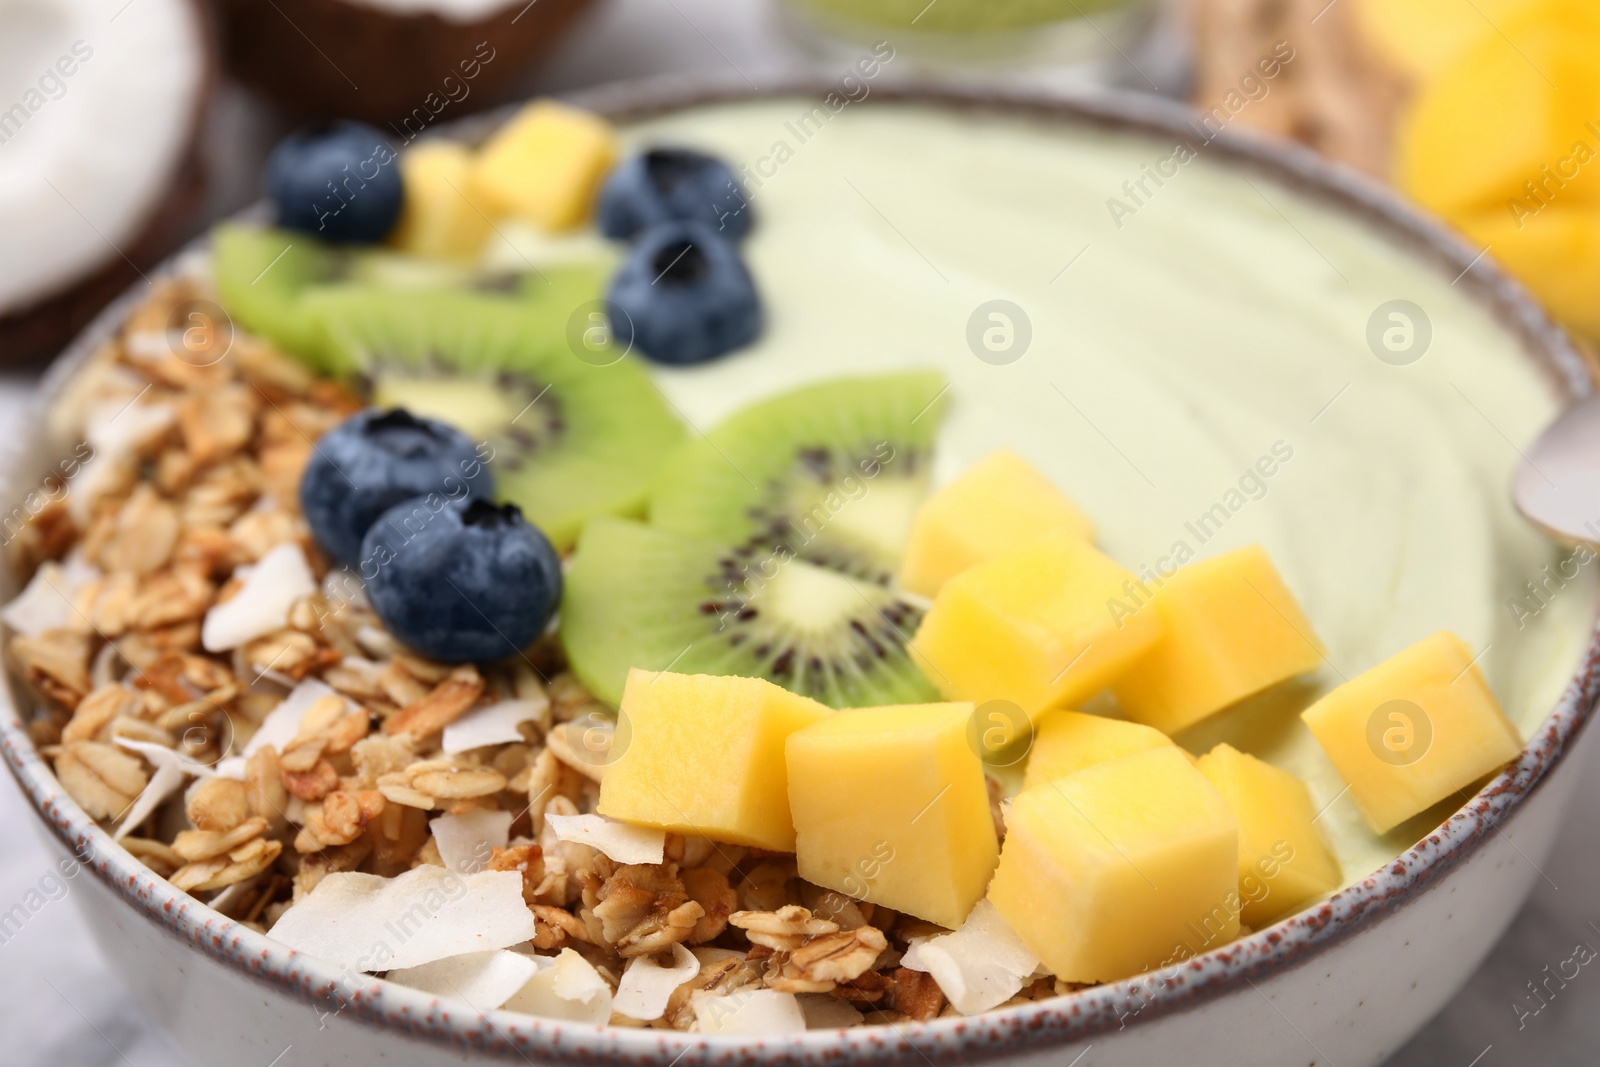 Photo of Tasty matcha smoothie bowl served with fresh fruits and oatmeal on table, closeup. Healthy breakfast